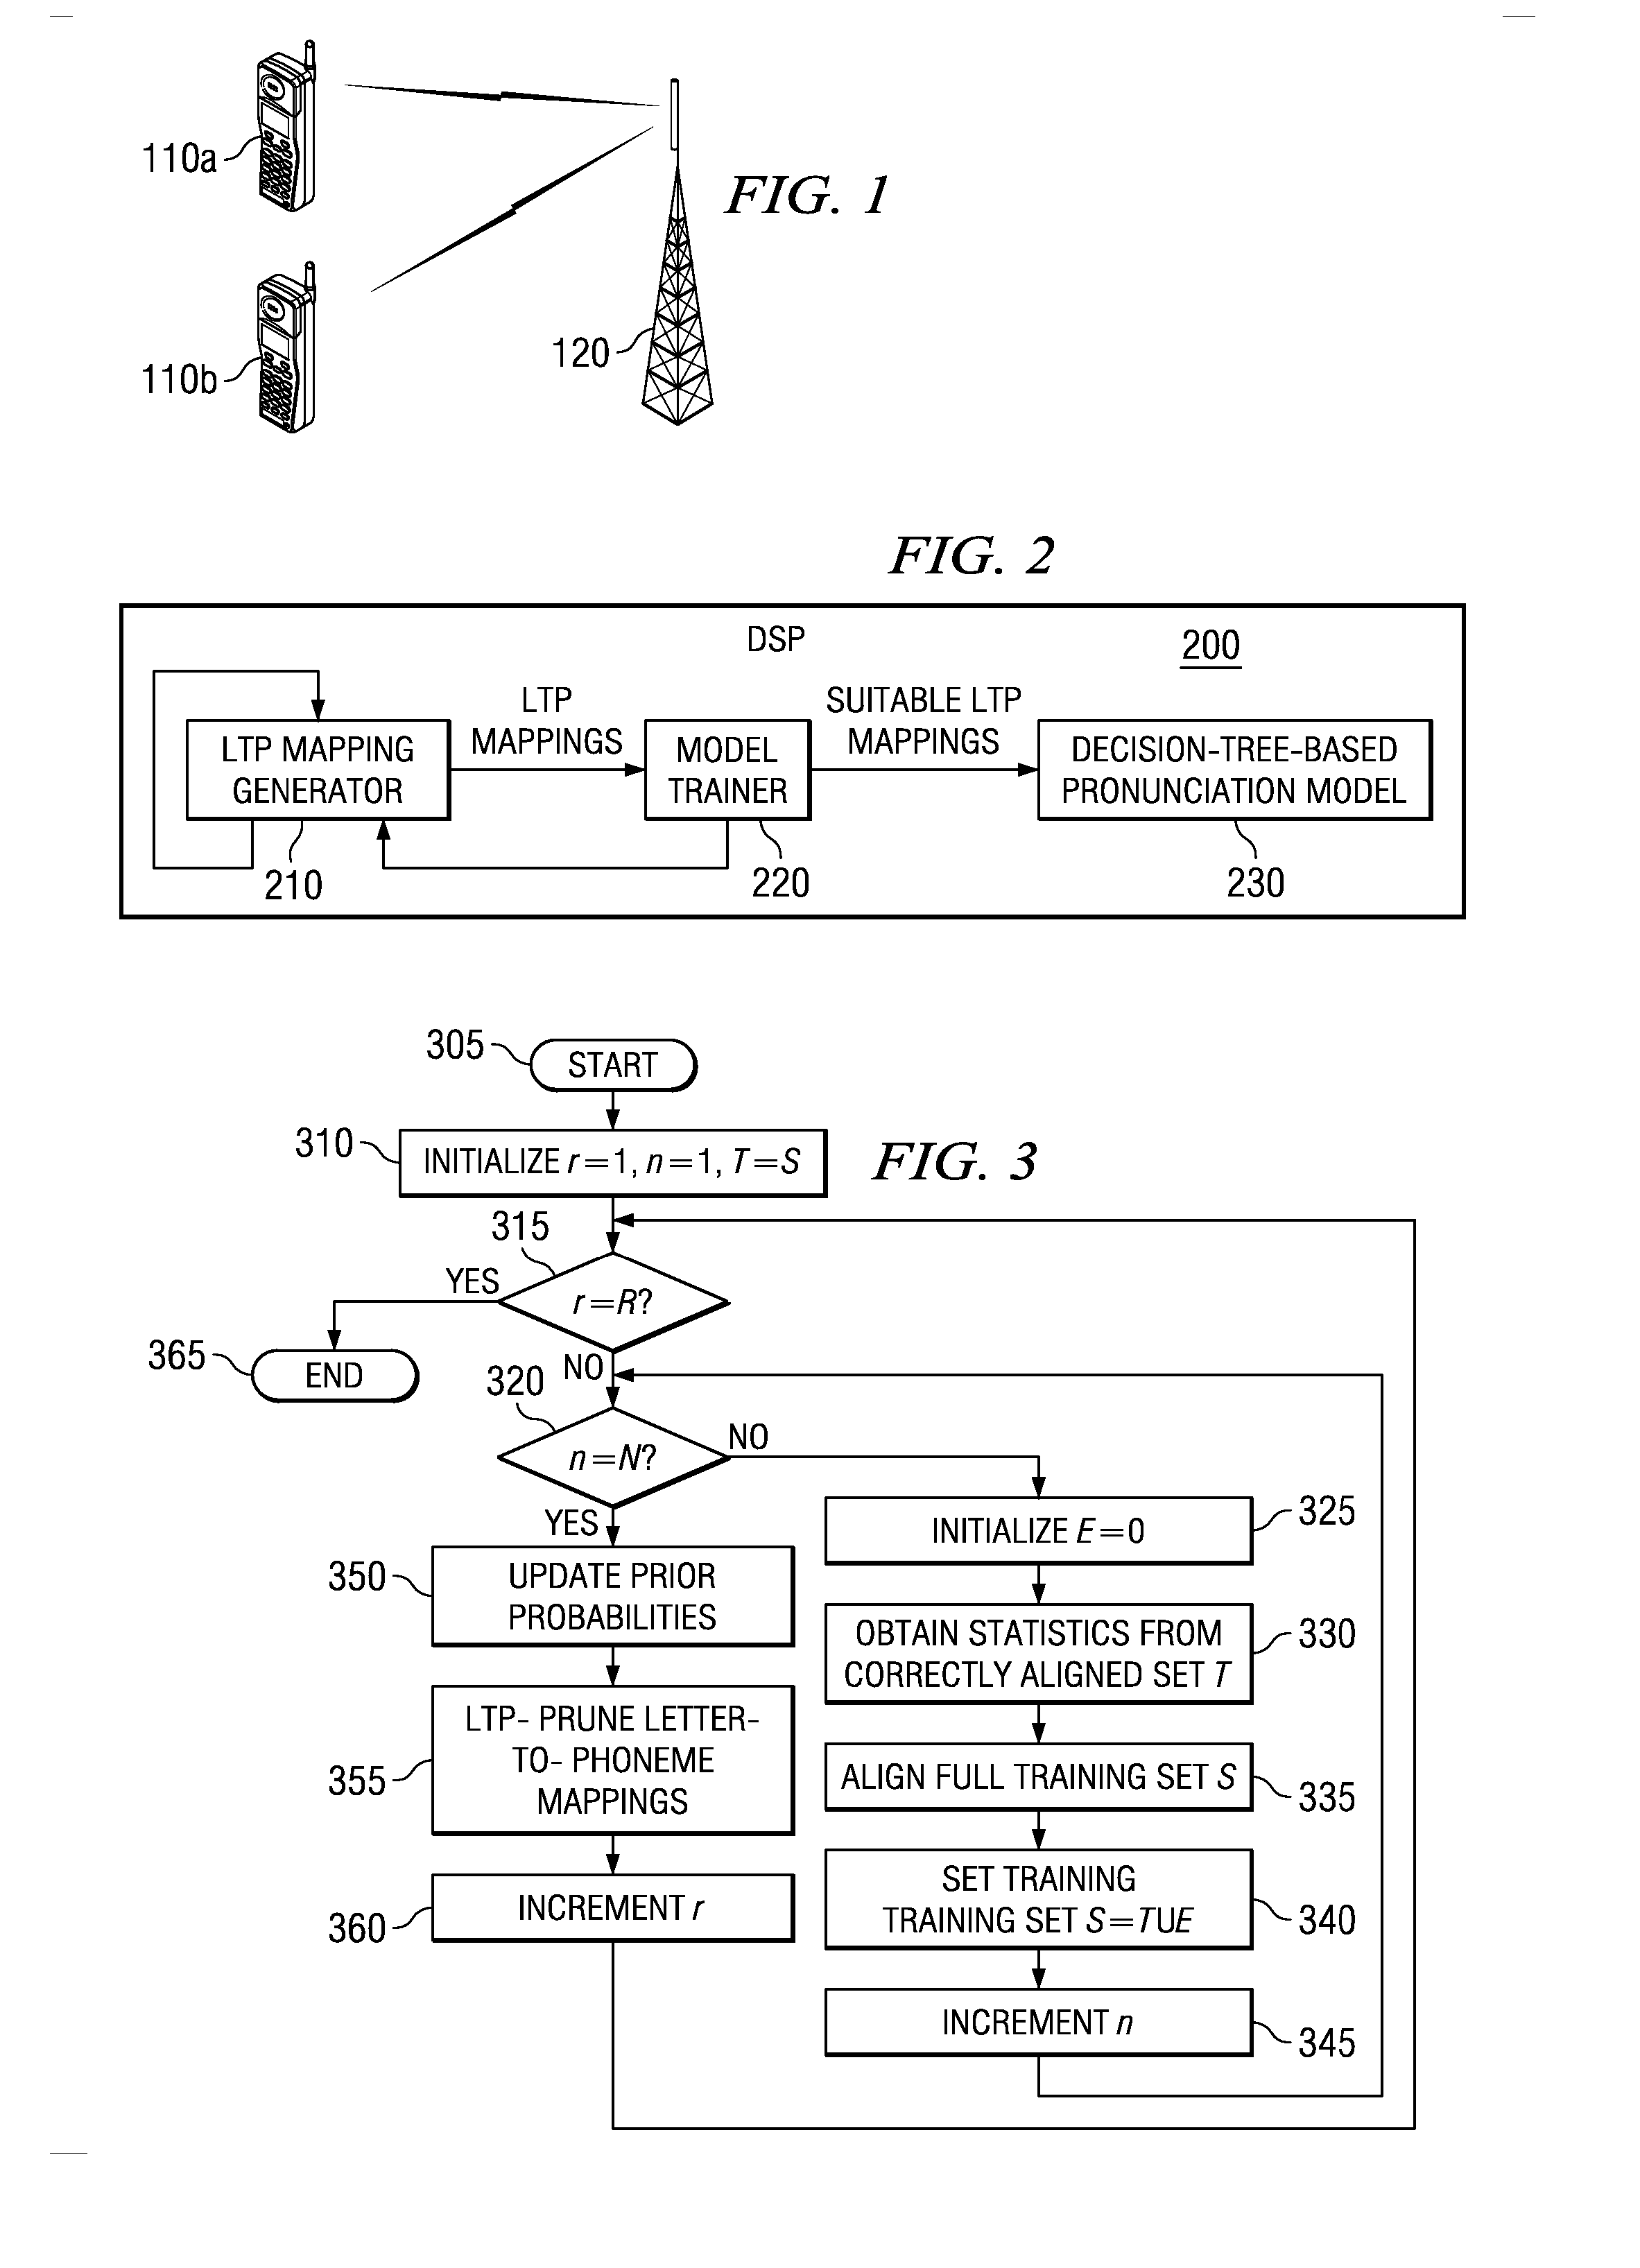 System and method for text-to-phoneme mapping with prior knowledge